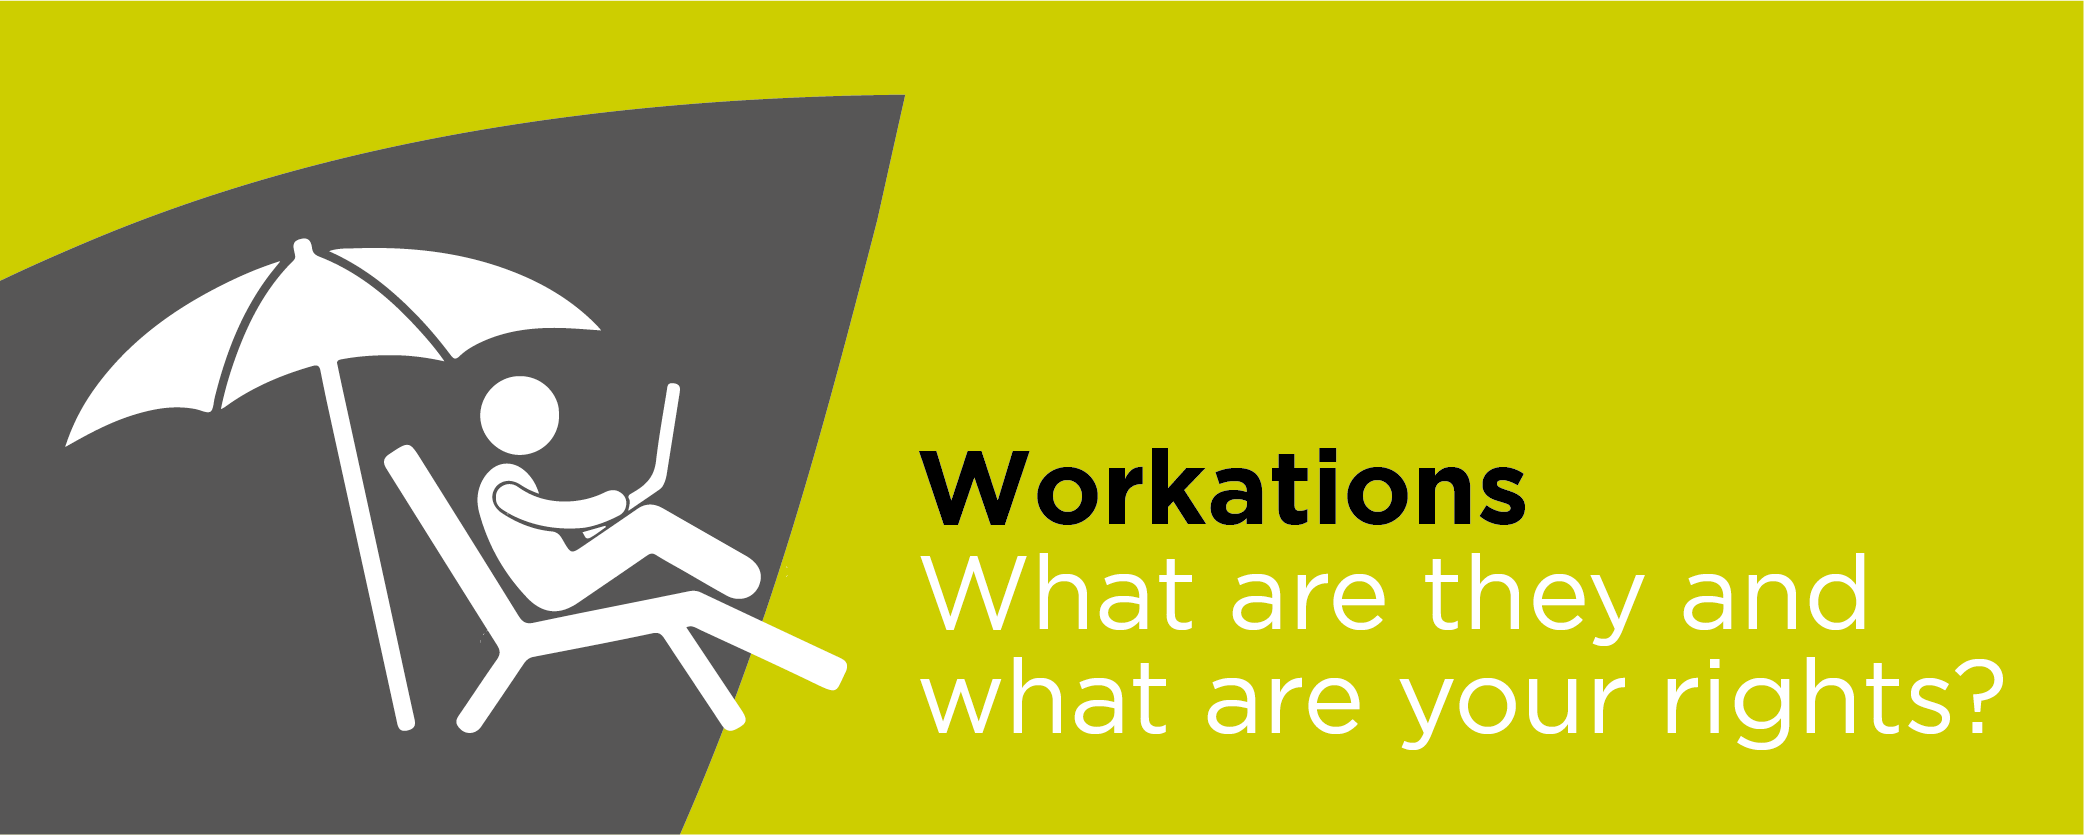 Workations: What are they and what are your rights?